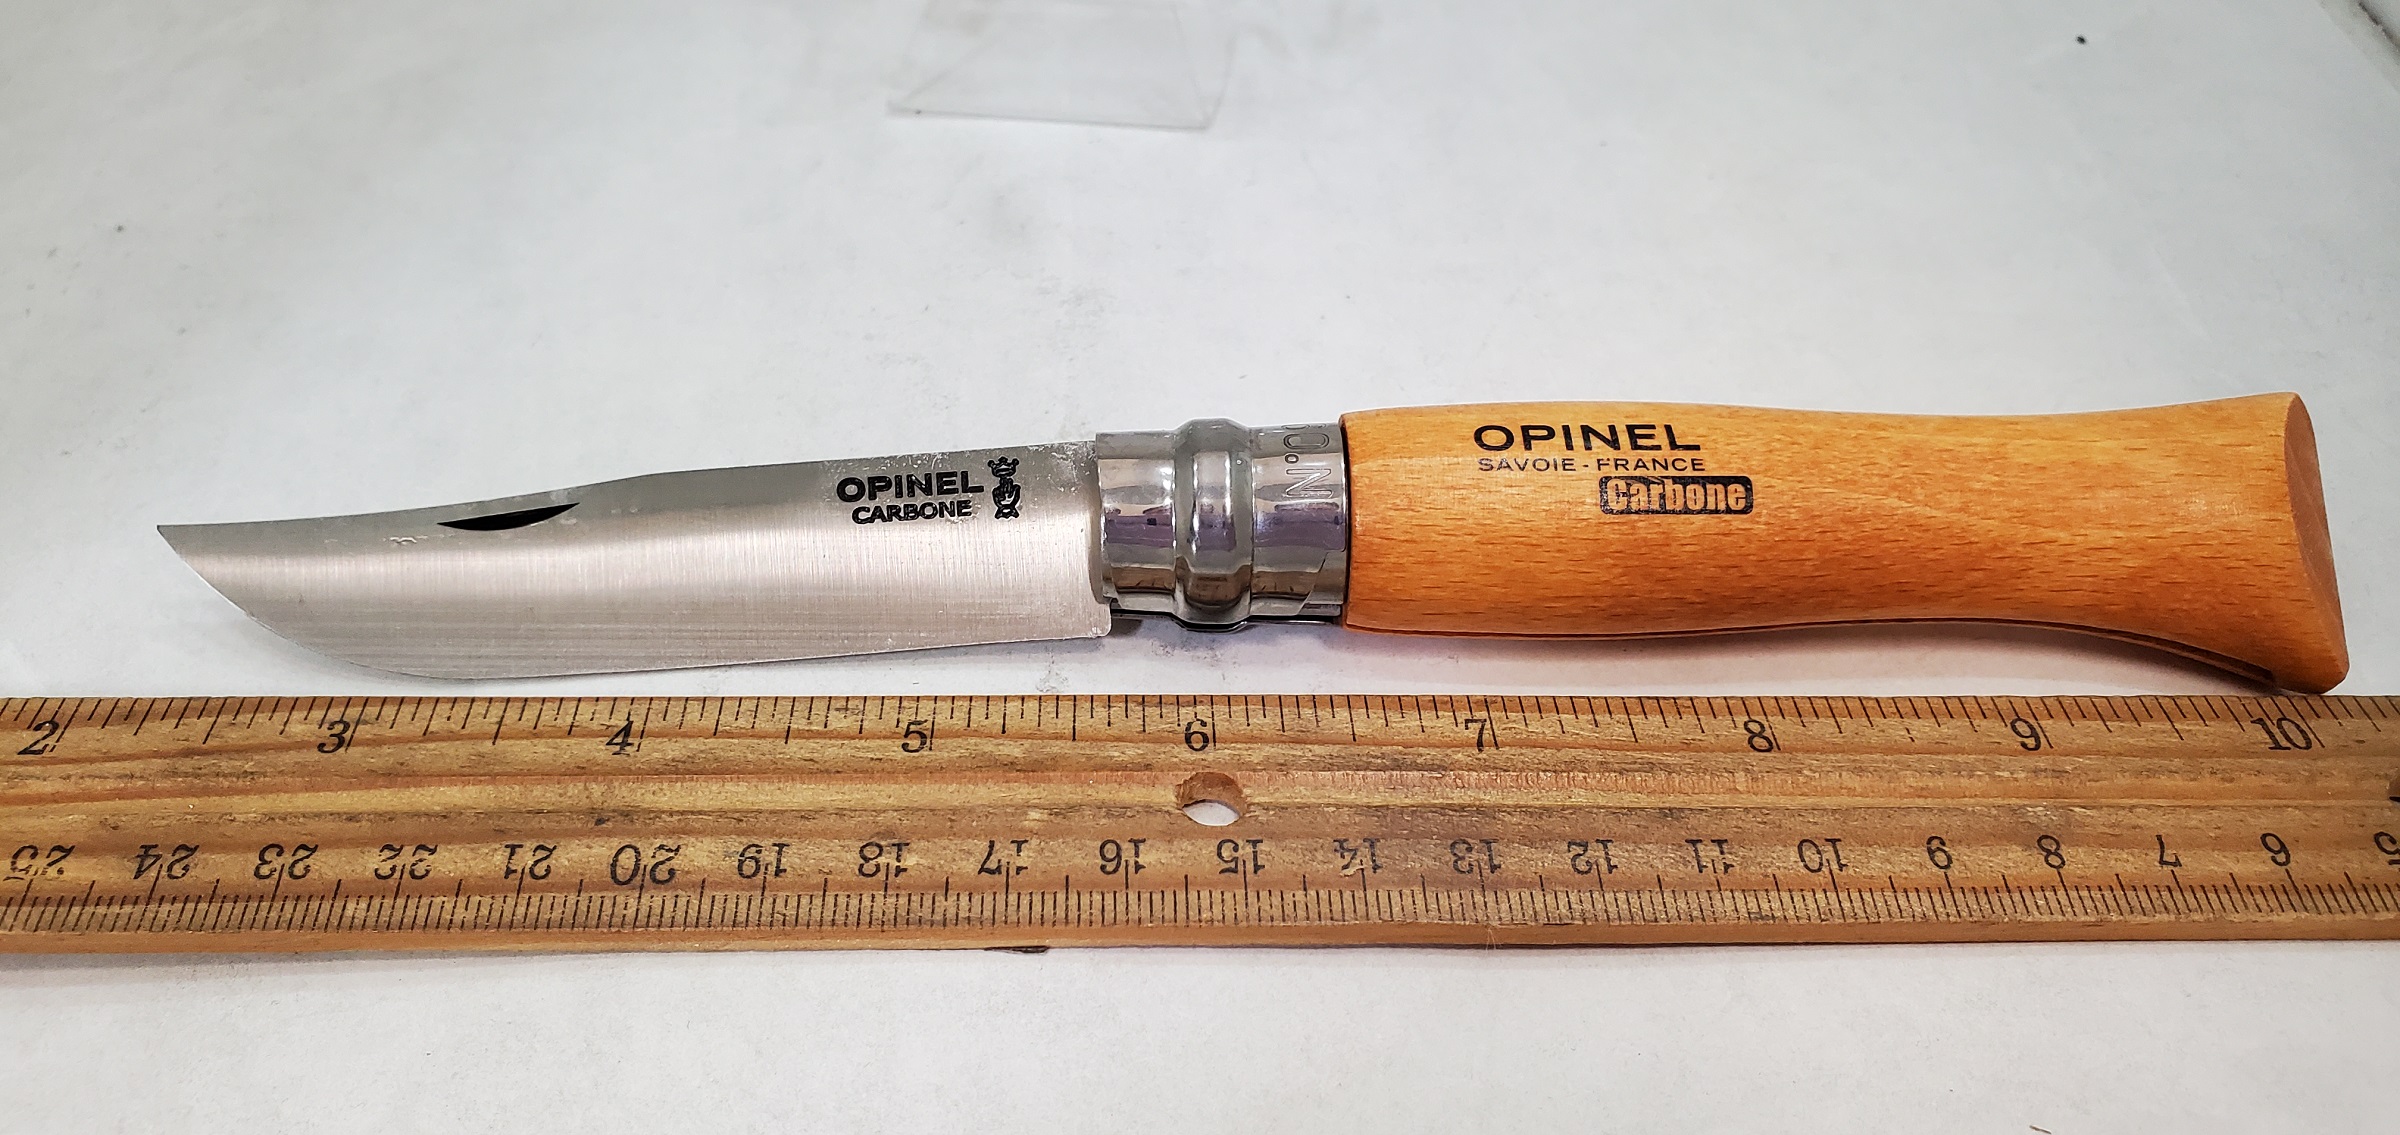 No. 9 Opinel Carbon Knife 13090 4-3/4 inch